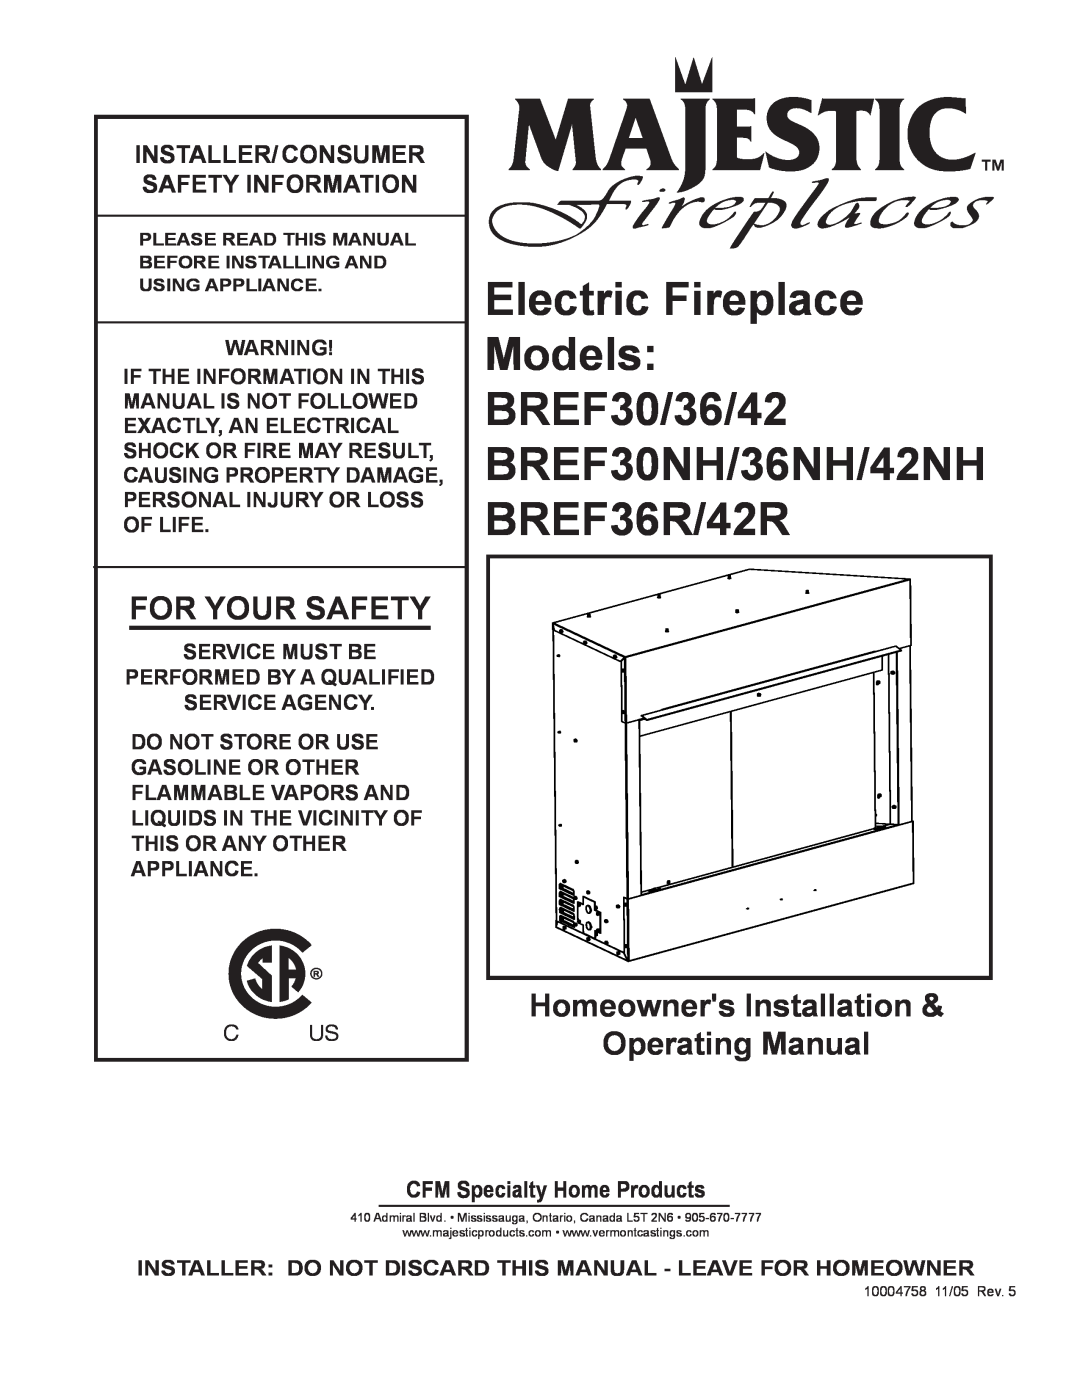 Vermont Casting BREF36R/42R, BREF30, BREF36, BREF42 manual For Your Safety, Homeowners Installation & Operating Manual 